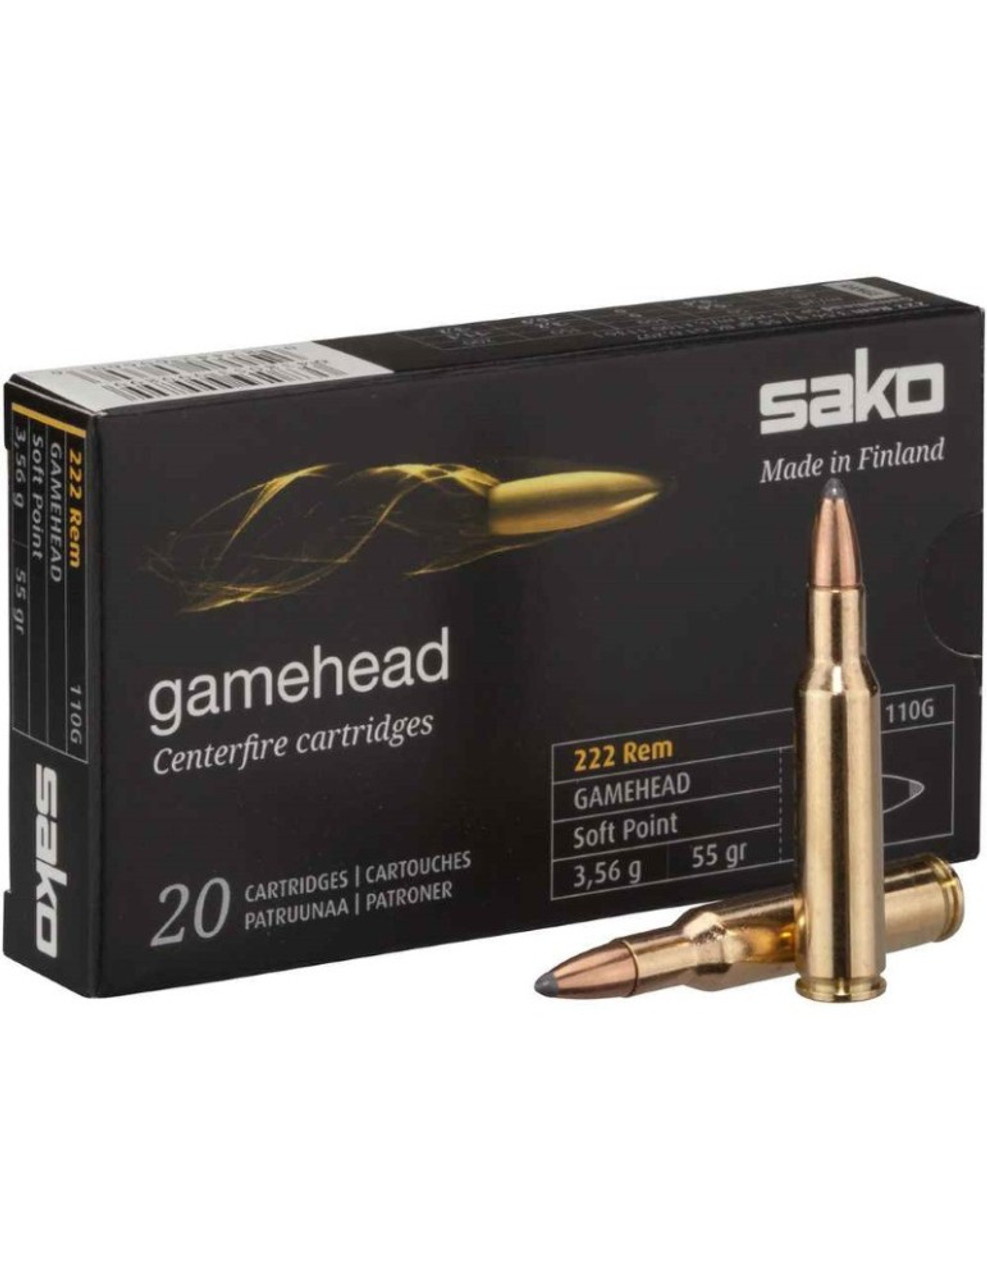 The Sako Gamehead bullet is a traditional and accurate soft point bullet.

An excellent all-purpose hunting bullet on small/medium sized game. 223 Rem, SoftPoint, 3,56g / 55 ggr